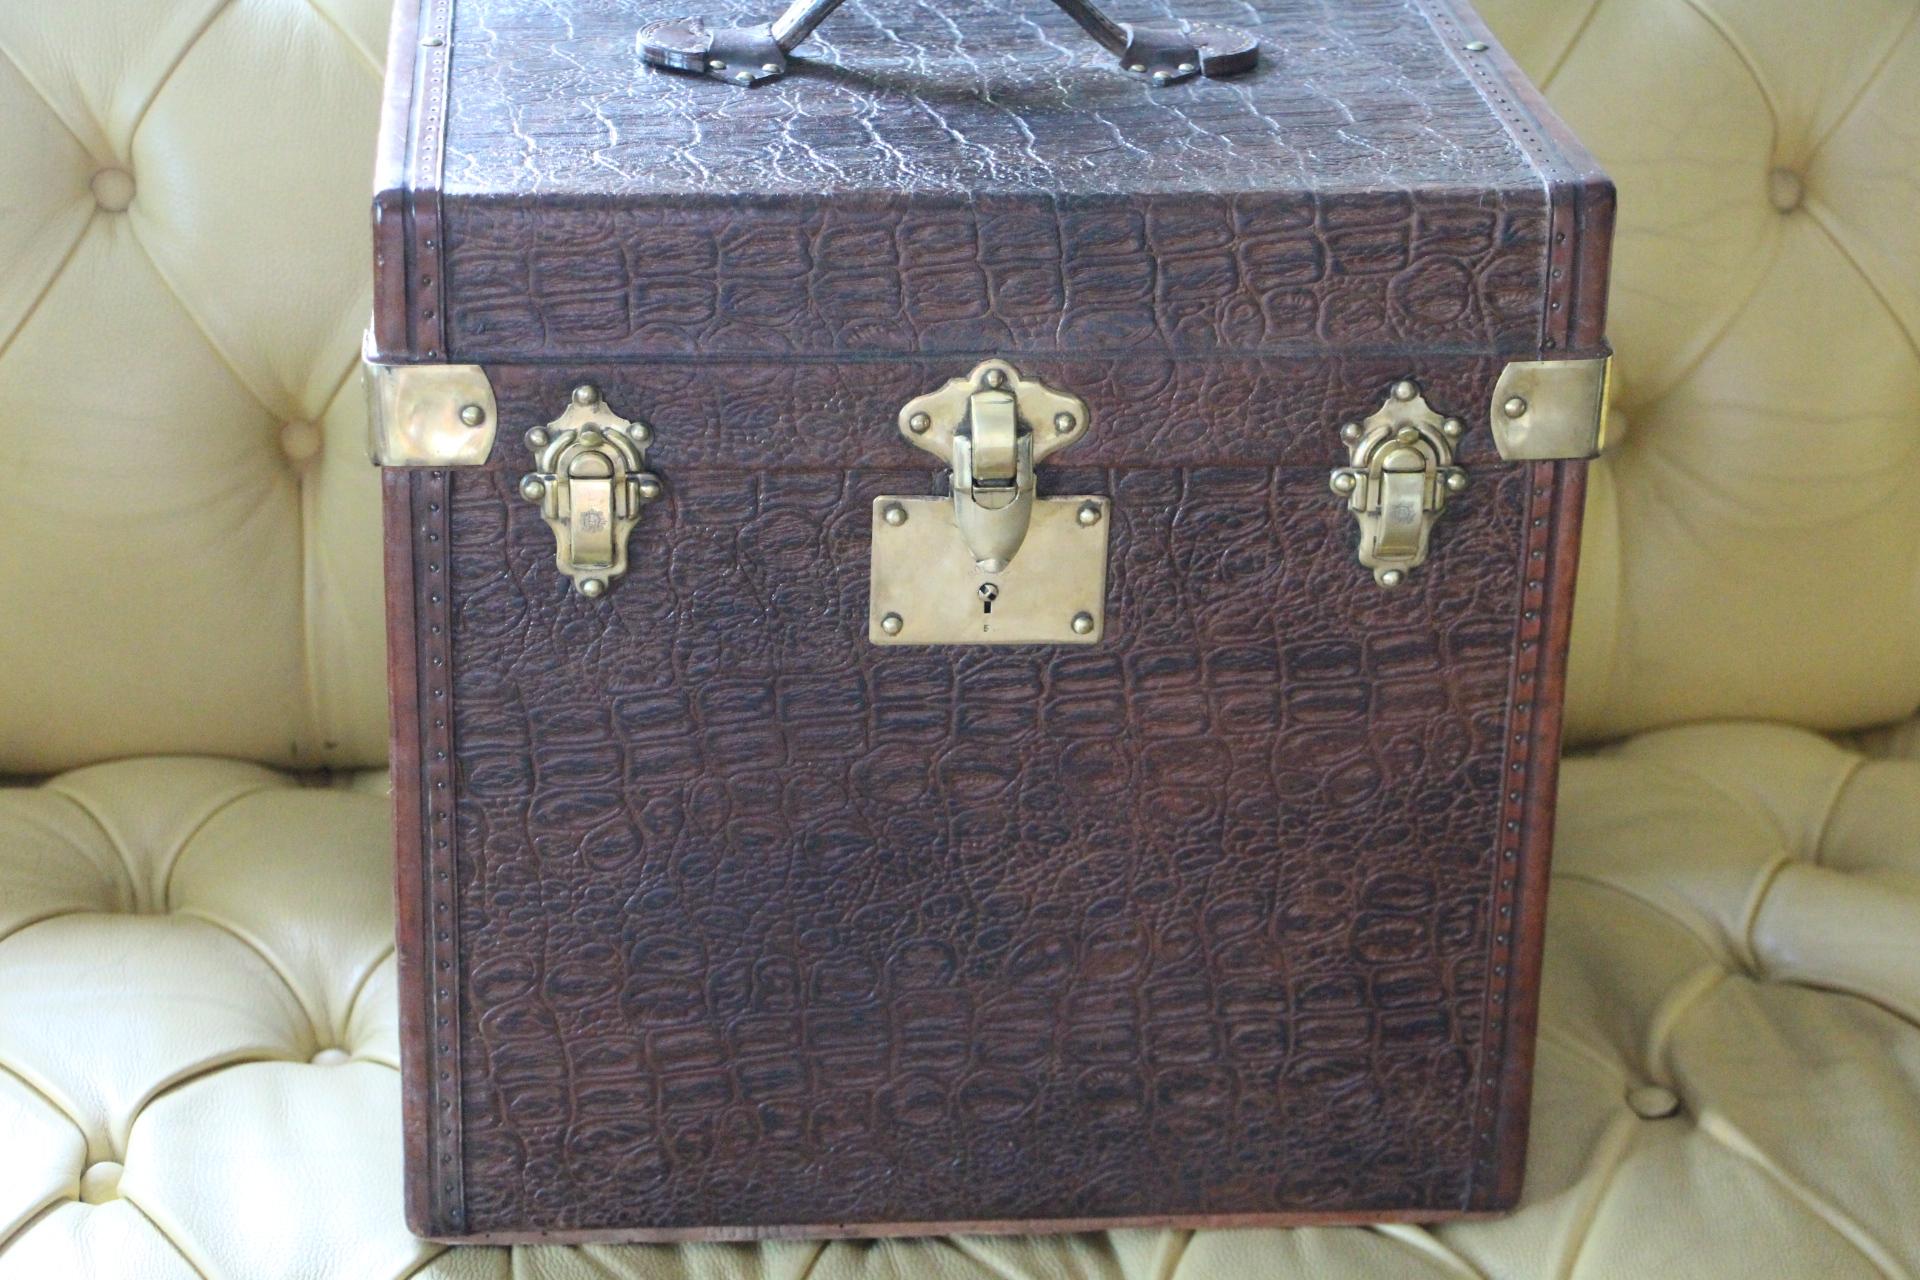 This very nice brown canvas and leather hat box features leather trim and leather top handle as well as solid brass locks and studs.Its canvas looks like crocodile skin.
It is very elegant and it has got a very rich and warm patina.
Its interior